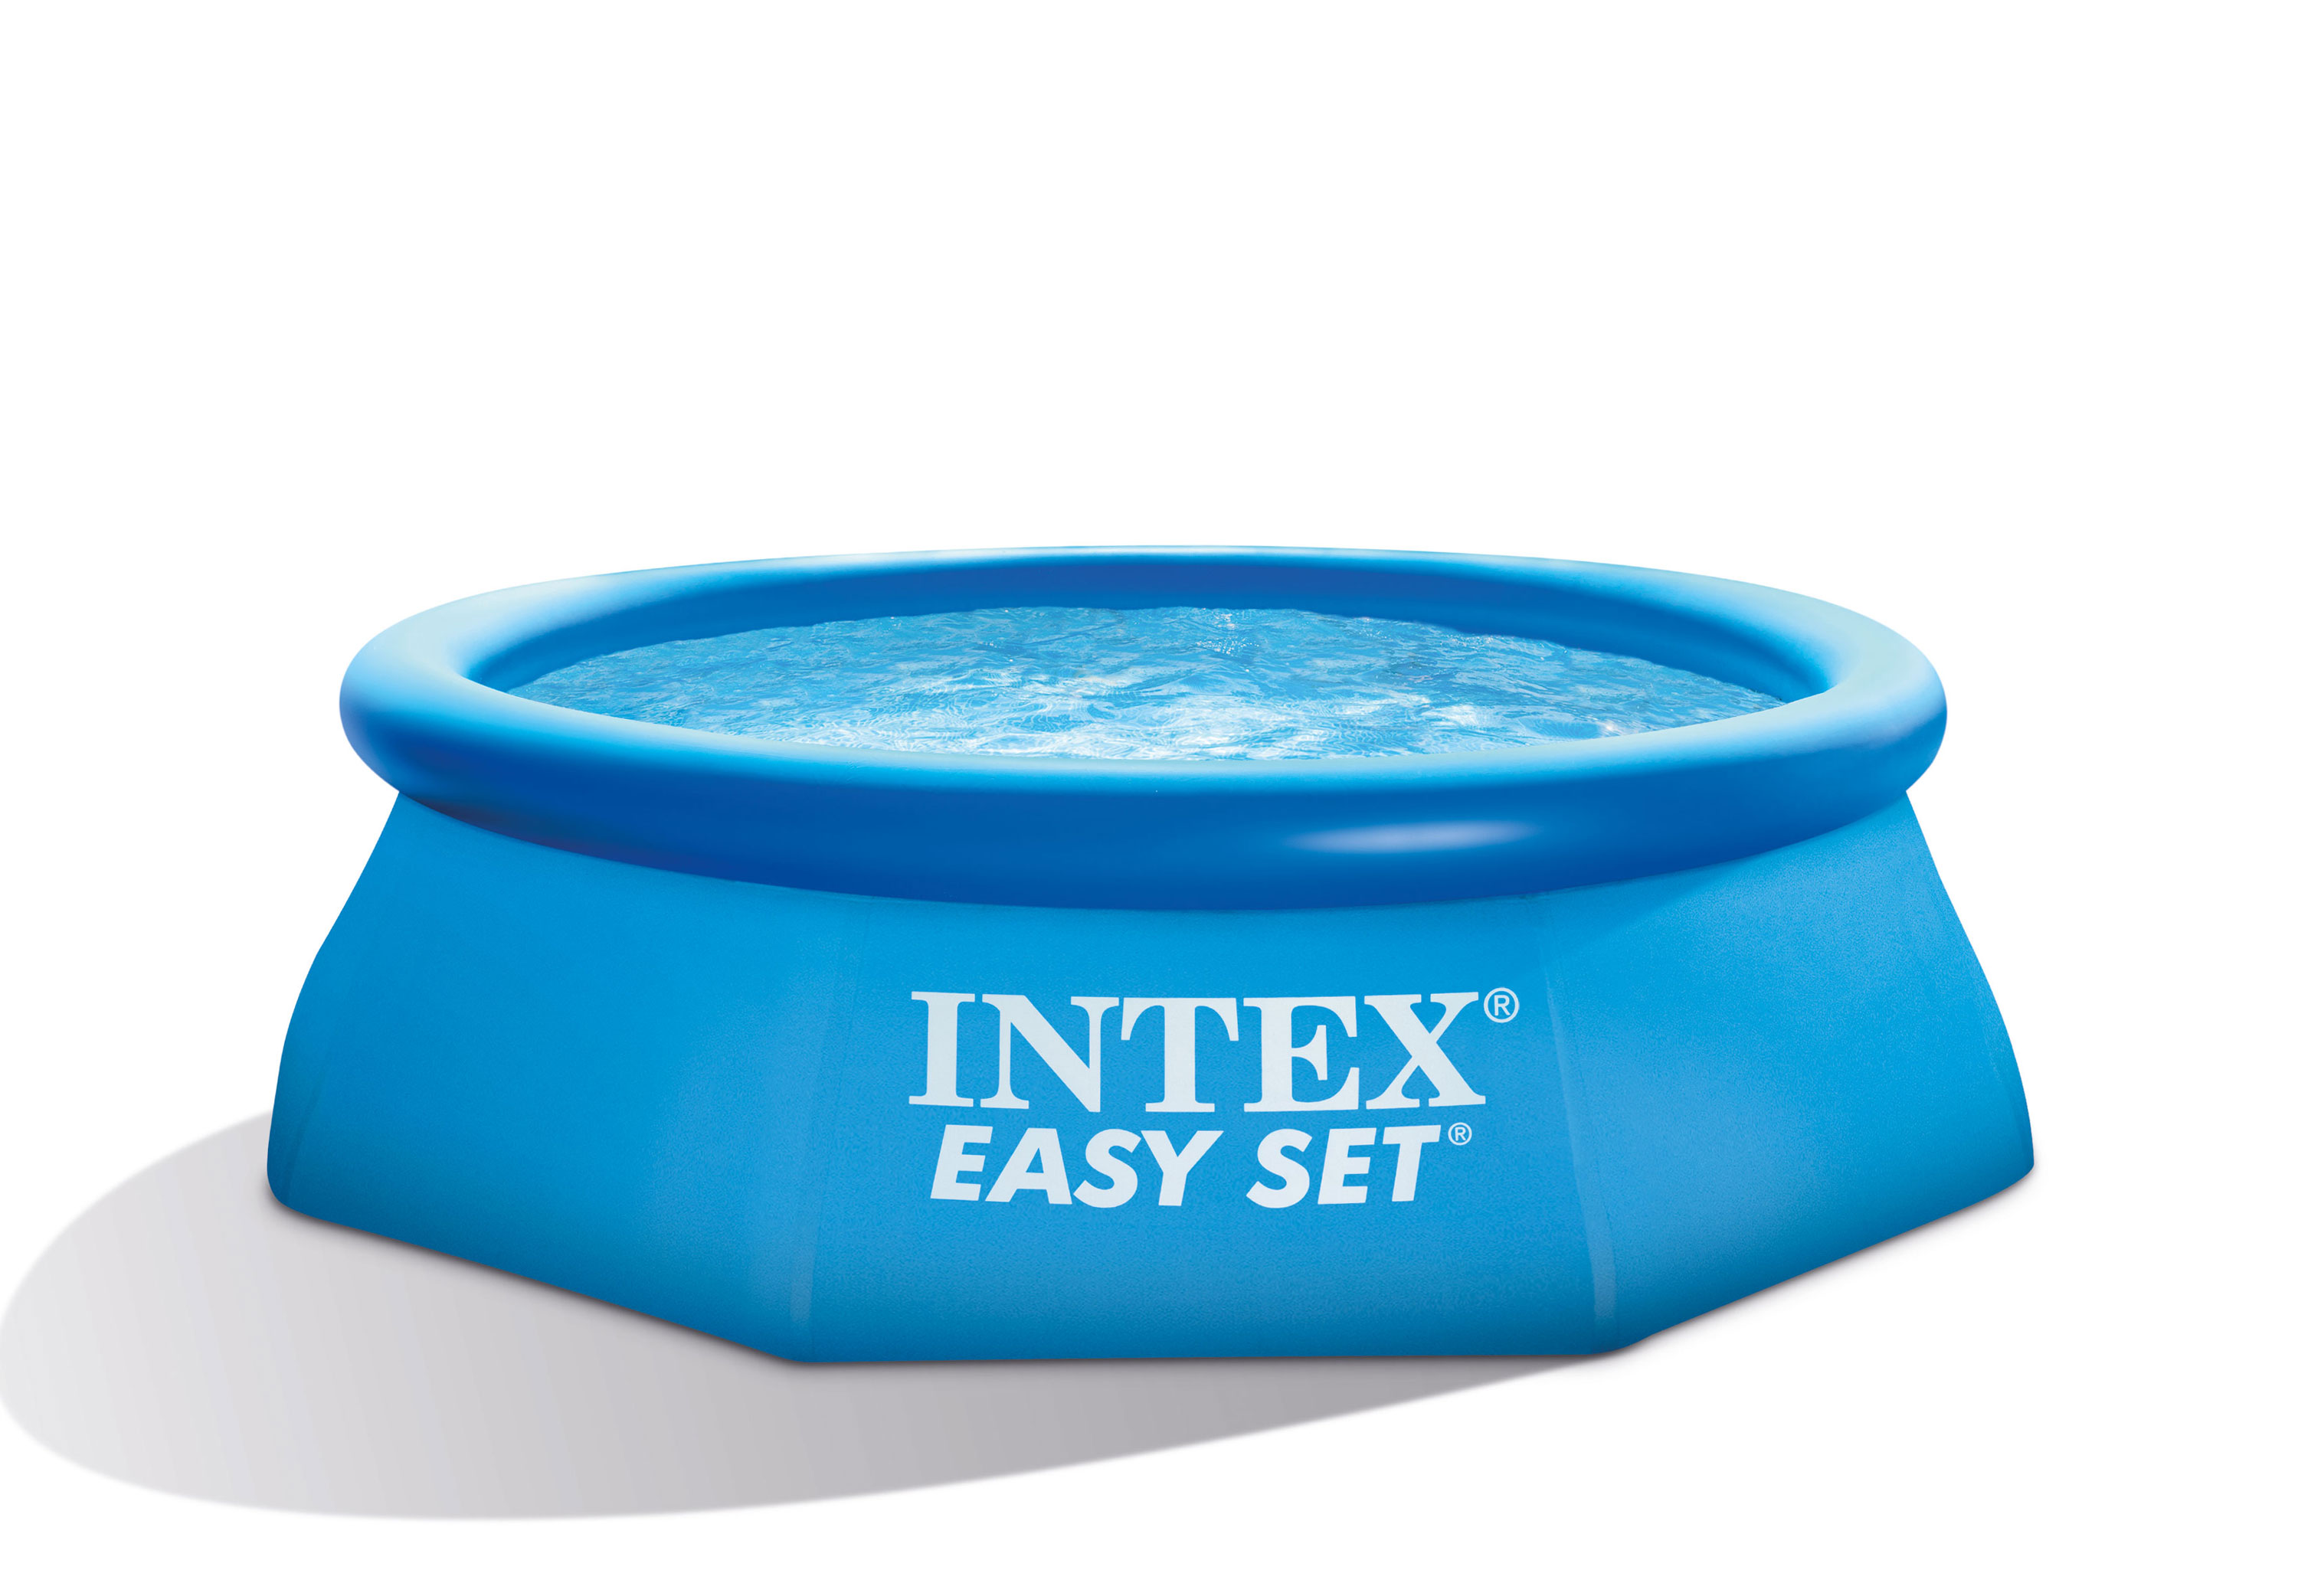 Intex 8 Feet x 30″ Easy Set Inflatable Above Ground Family Swimming Pool